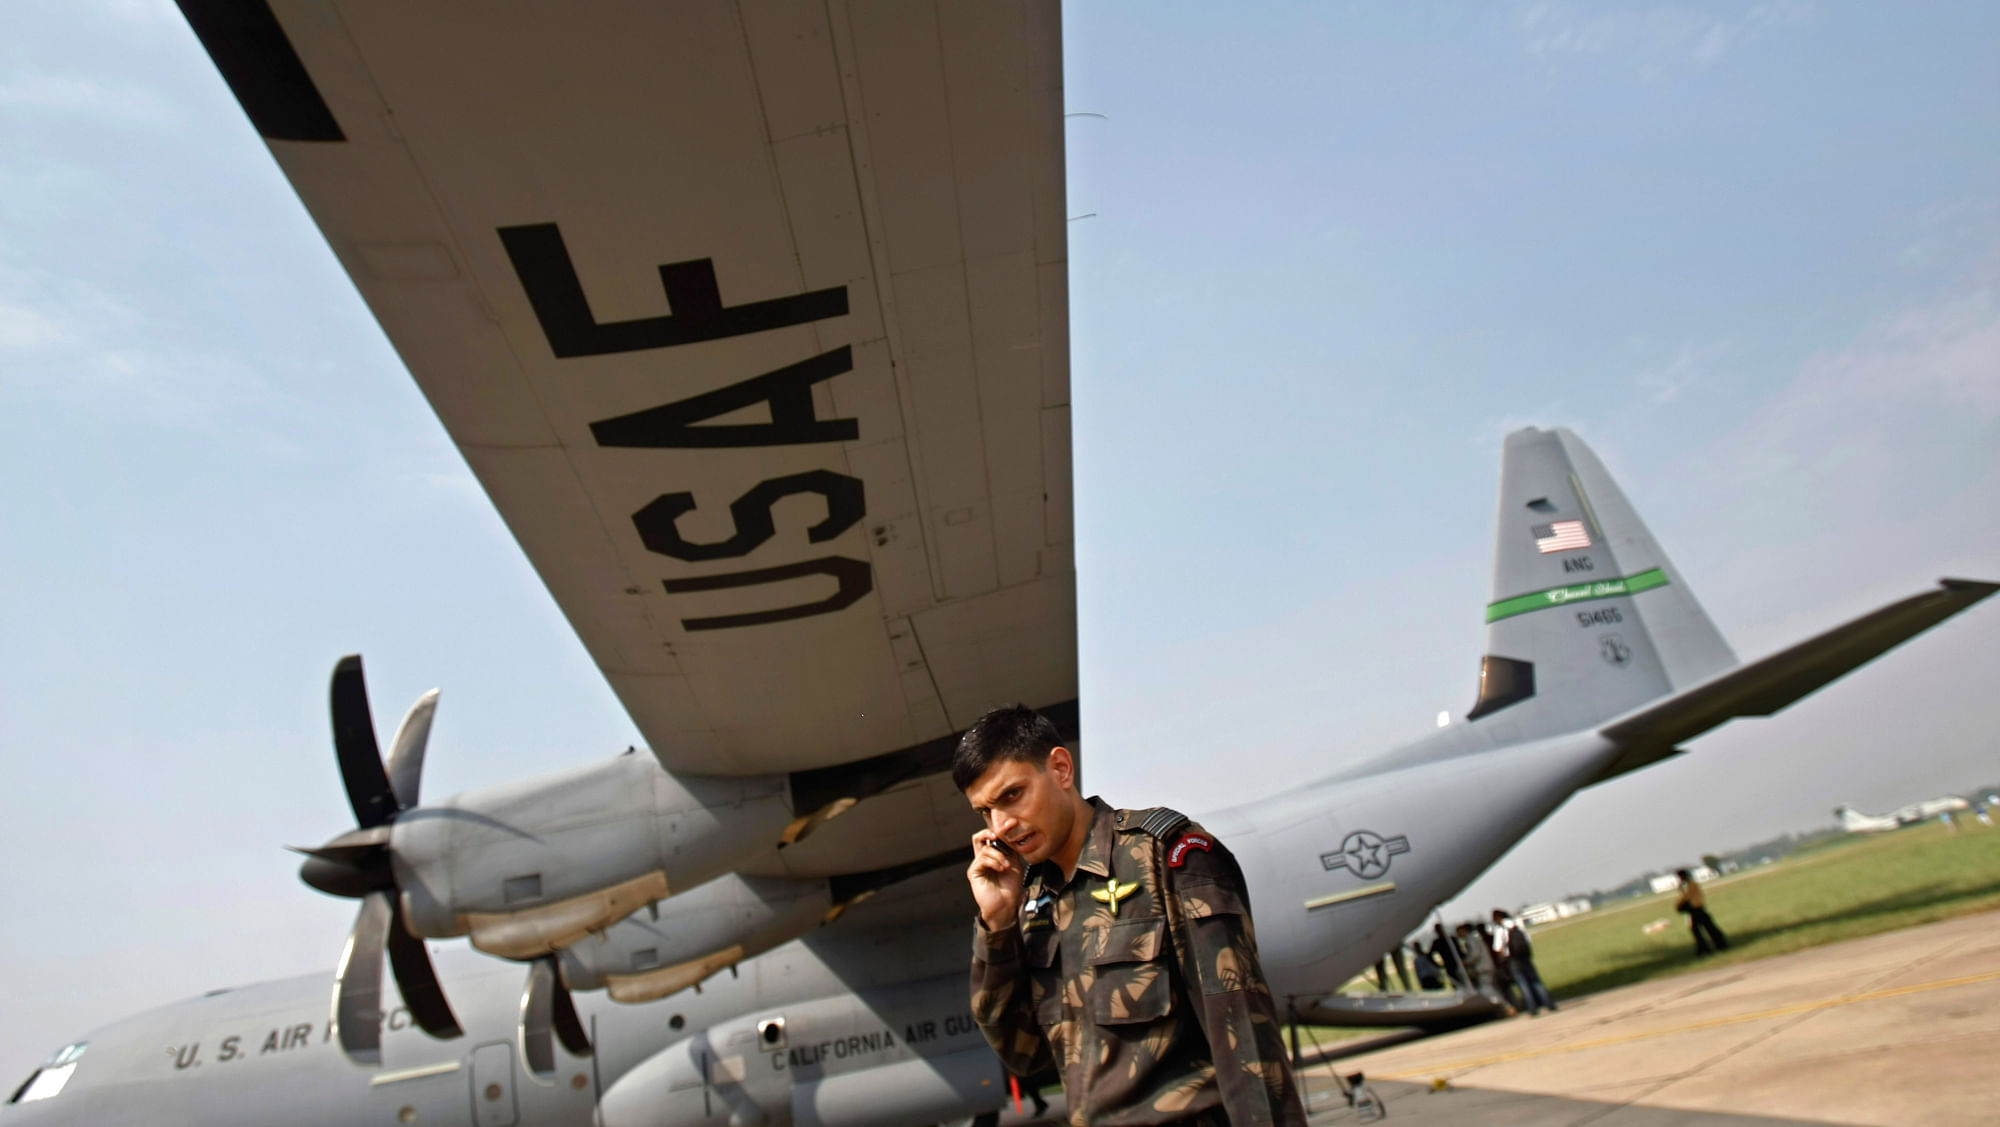  An Indian Air Force (IAF) special forces “Garuds” officer talks on his mobile phone during ‘Cope-India-09’, a joint exercise between the IAF and the US Air Force on the outskirts of  Agra, October 19, 2009. (Photo: Reuters)